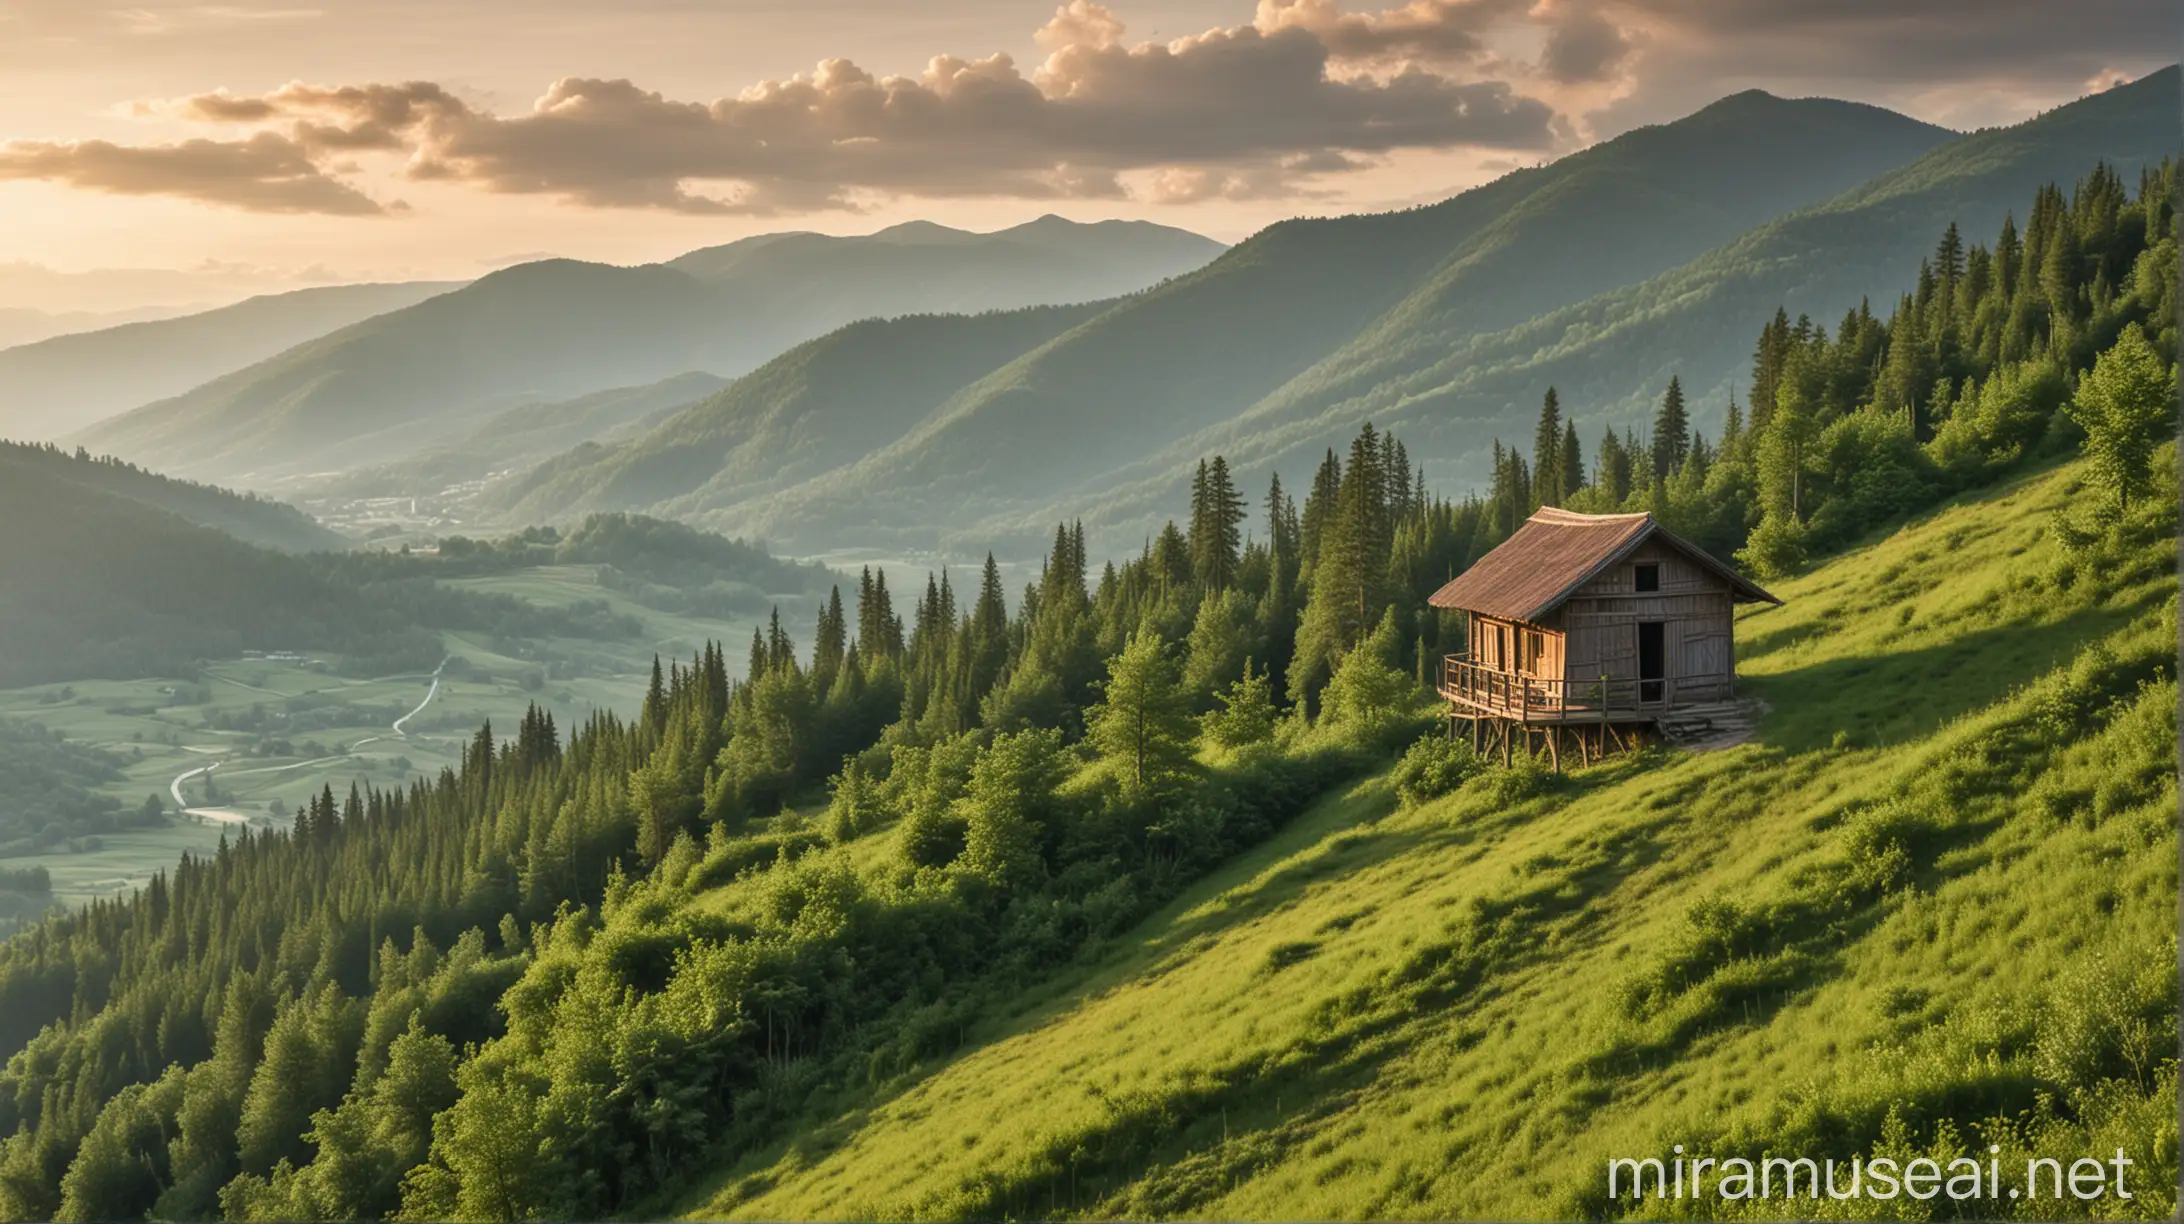 Mountain Hut Overlooking Verdant Foothills with Towering Trees